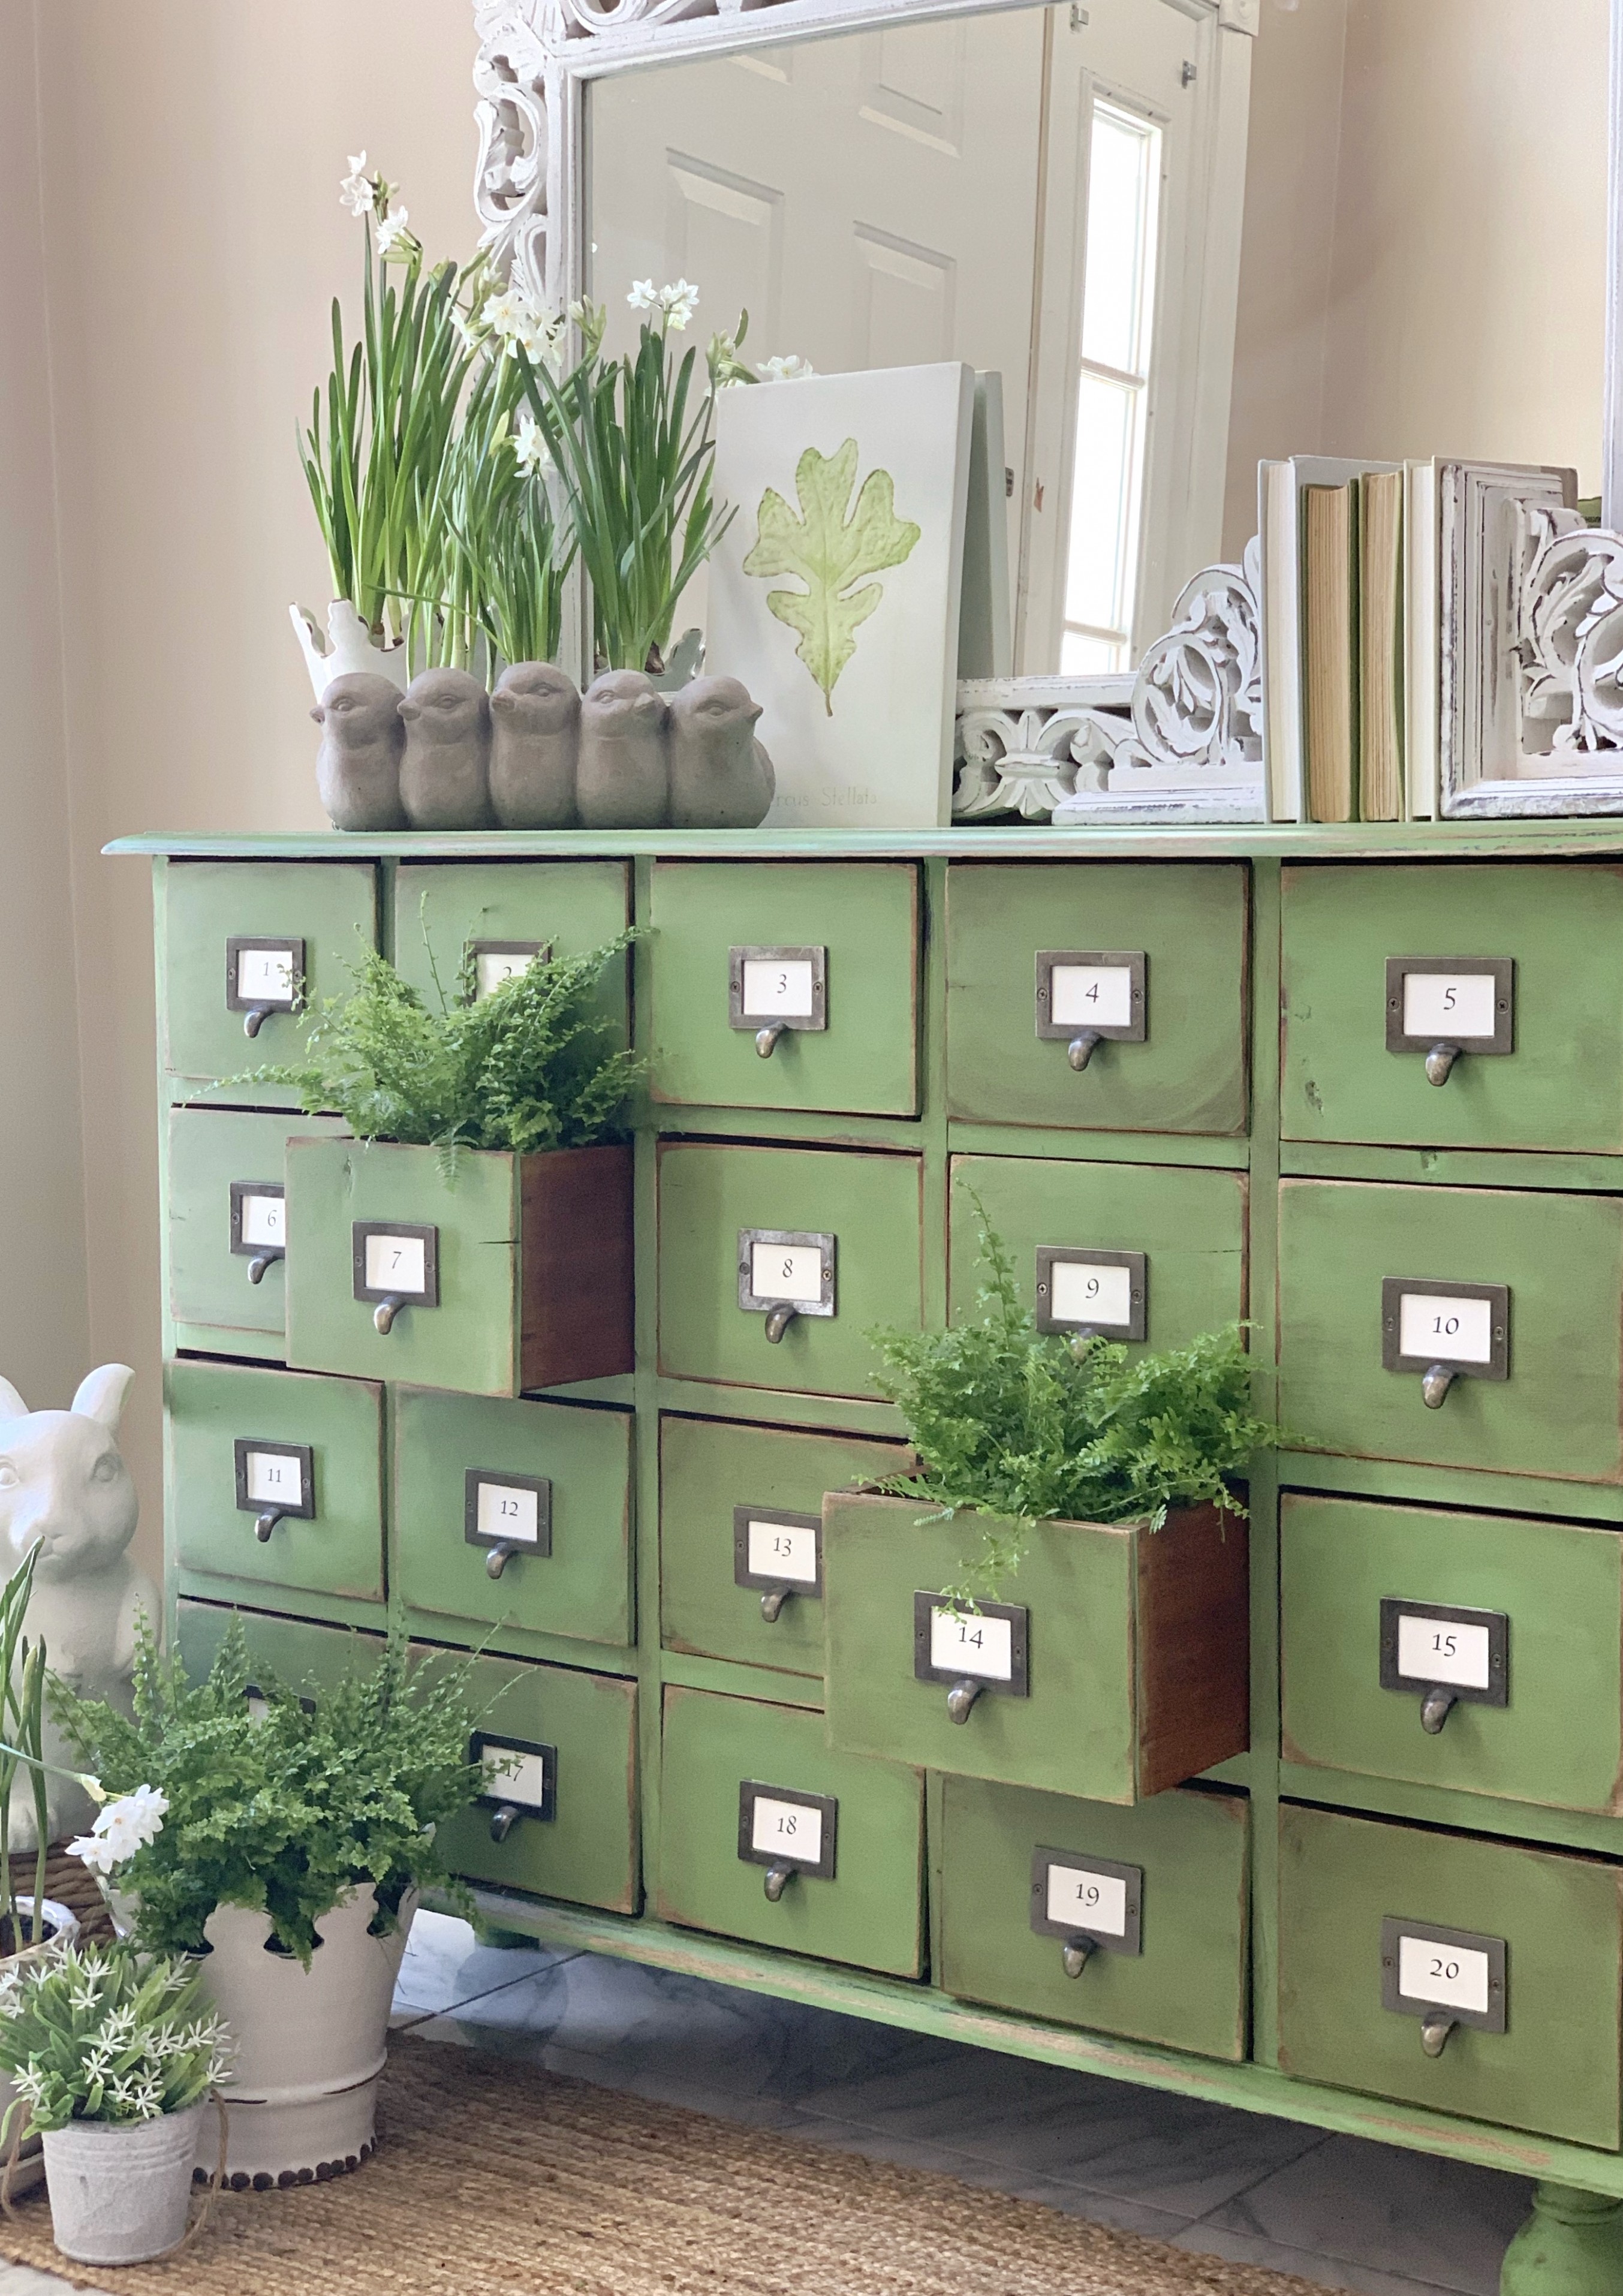 From Apothecary To Card Catalog Using Annie Sloan Chalk Paint! Annie Sloan Chalk Paint Distributors Near Me